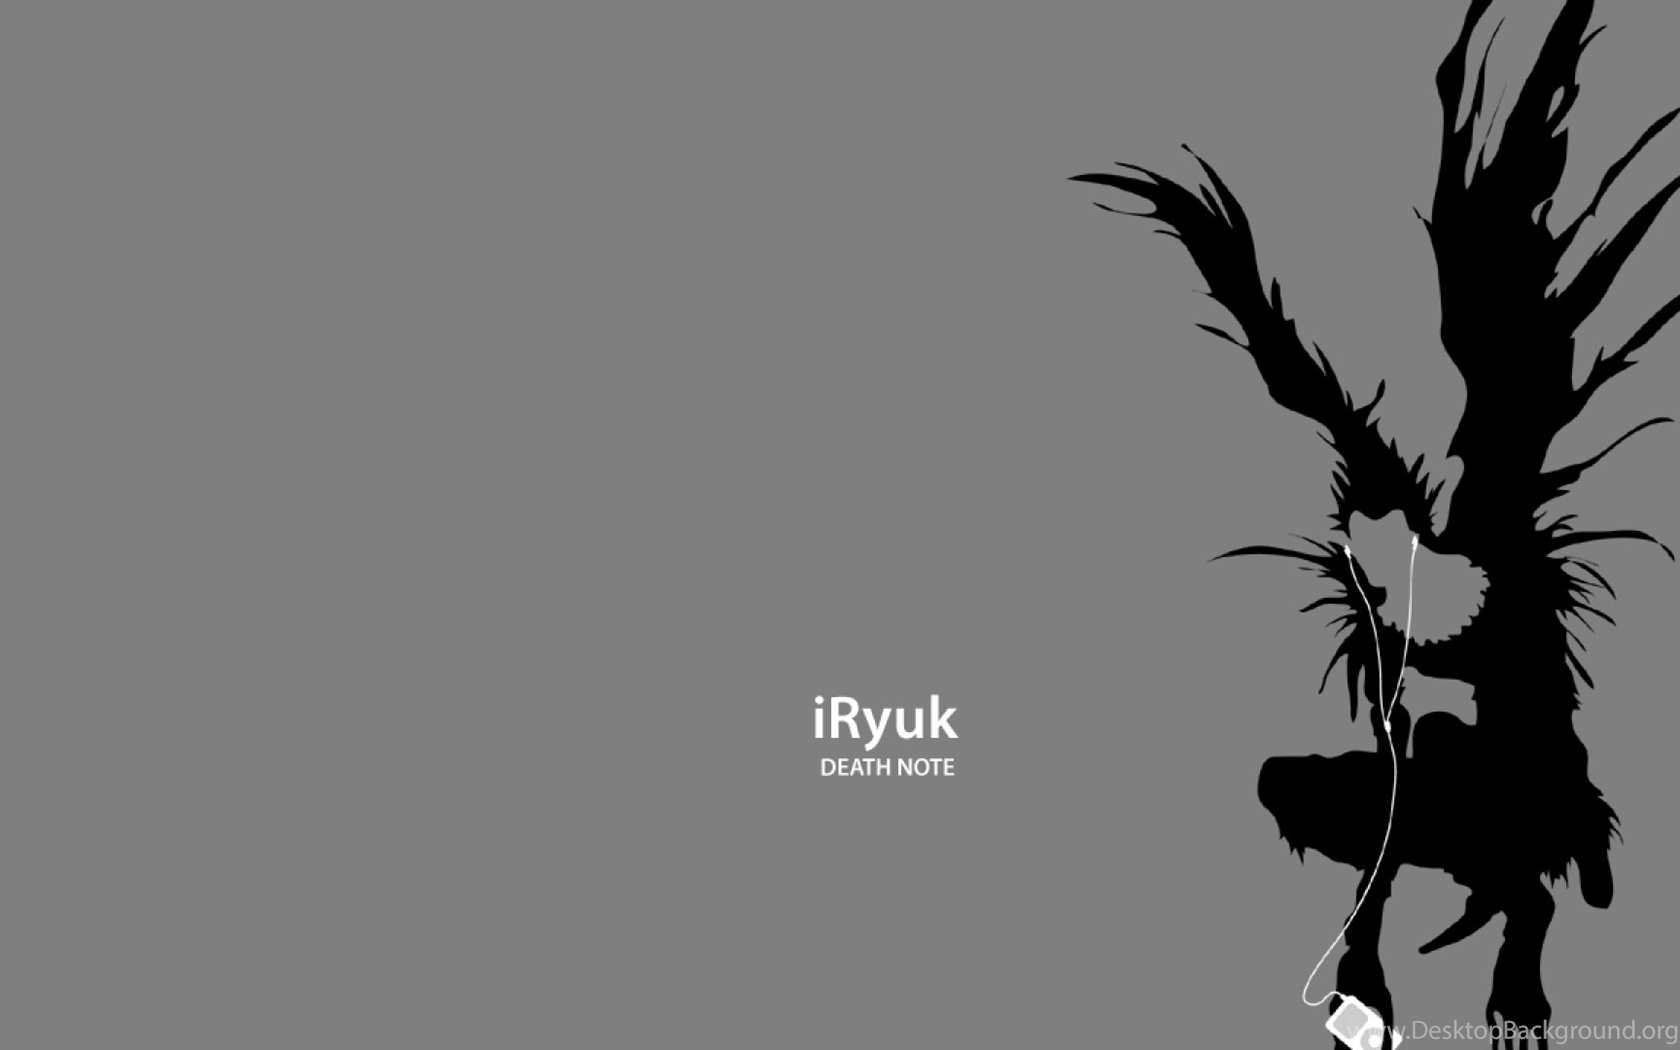 Ryuk Death Note Iphone Wallpapers Top Free Ryuk Death Note Iphone Backgrounds Wallpaperaccess